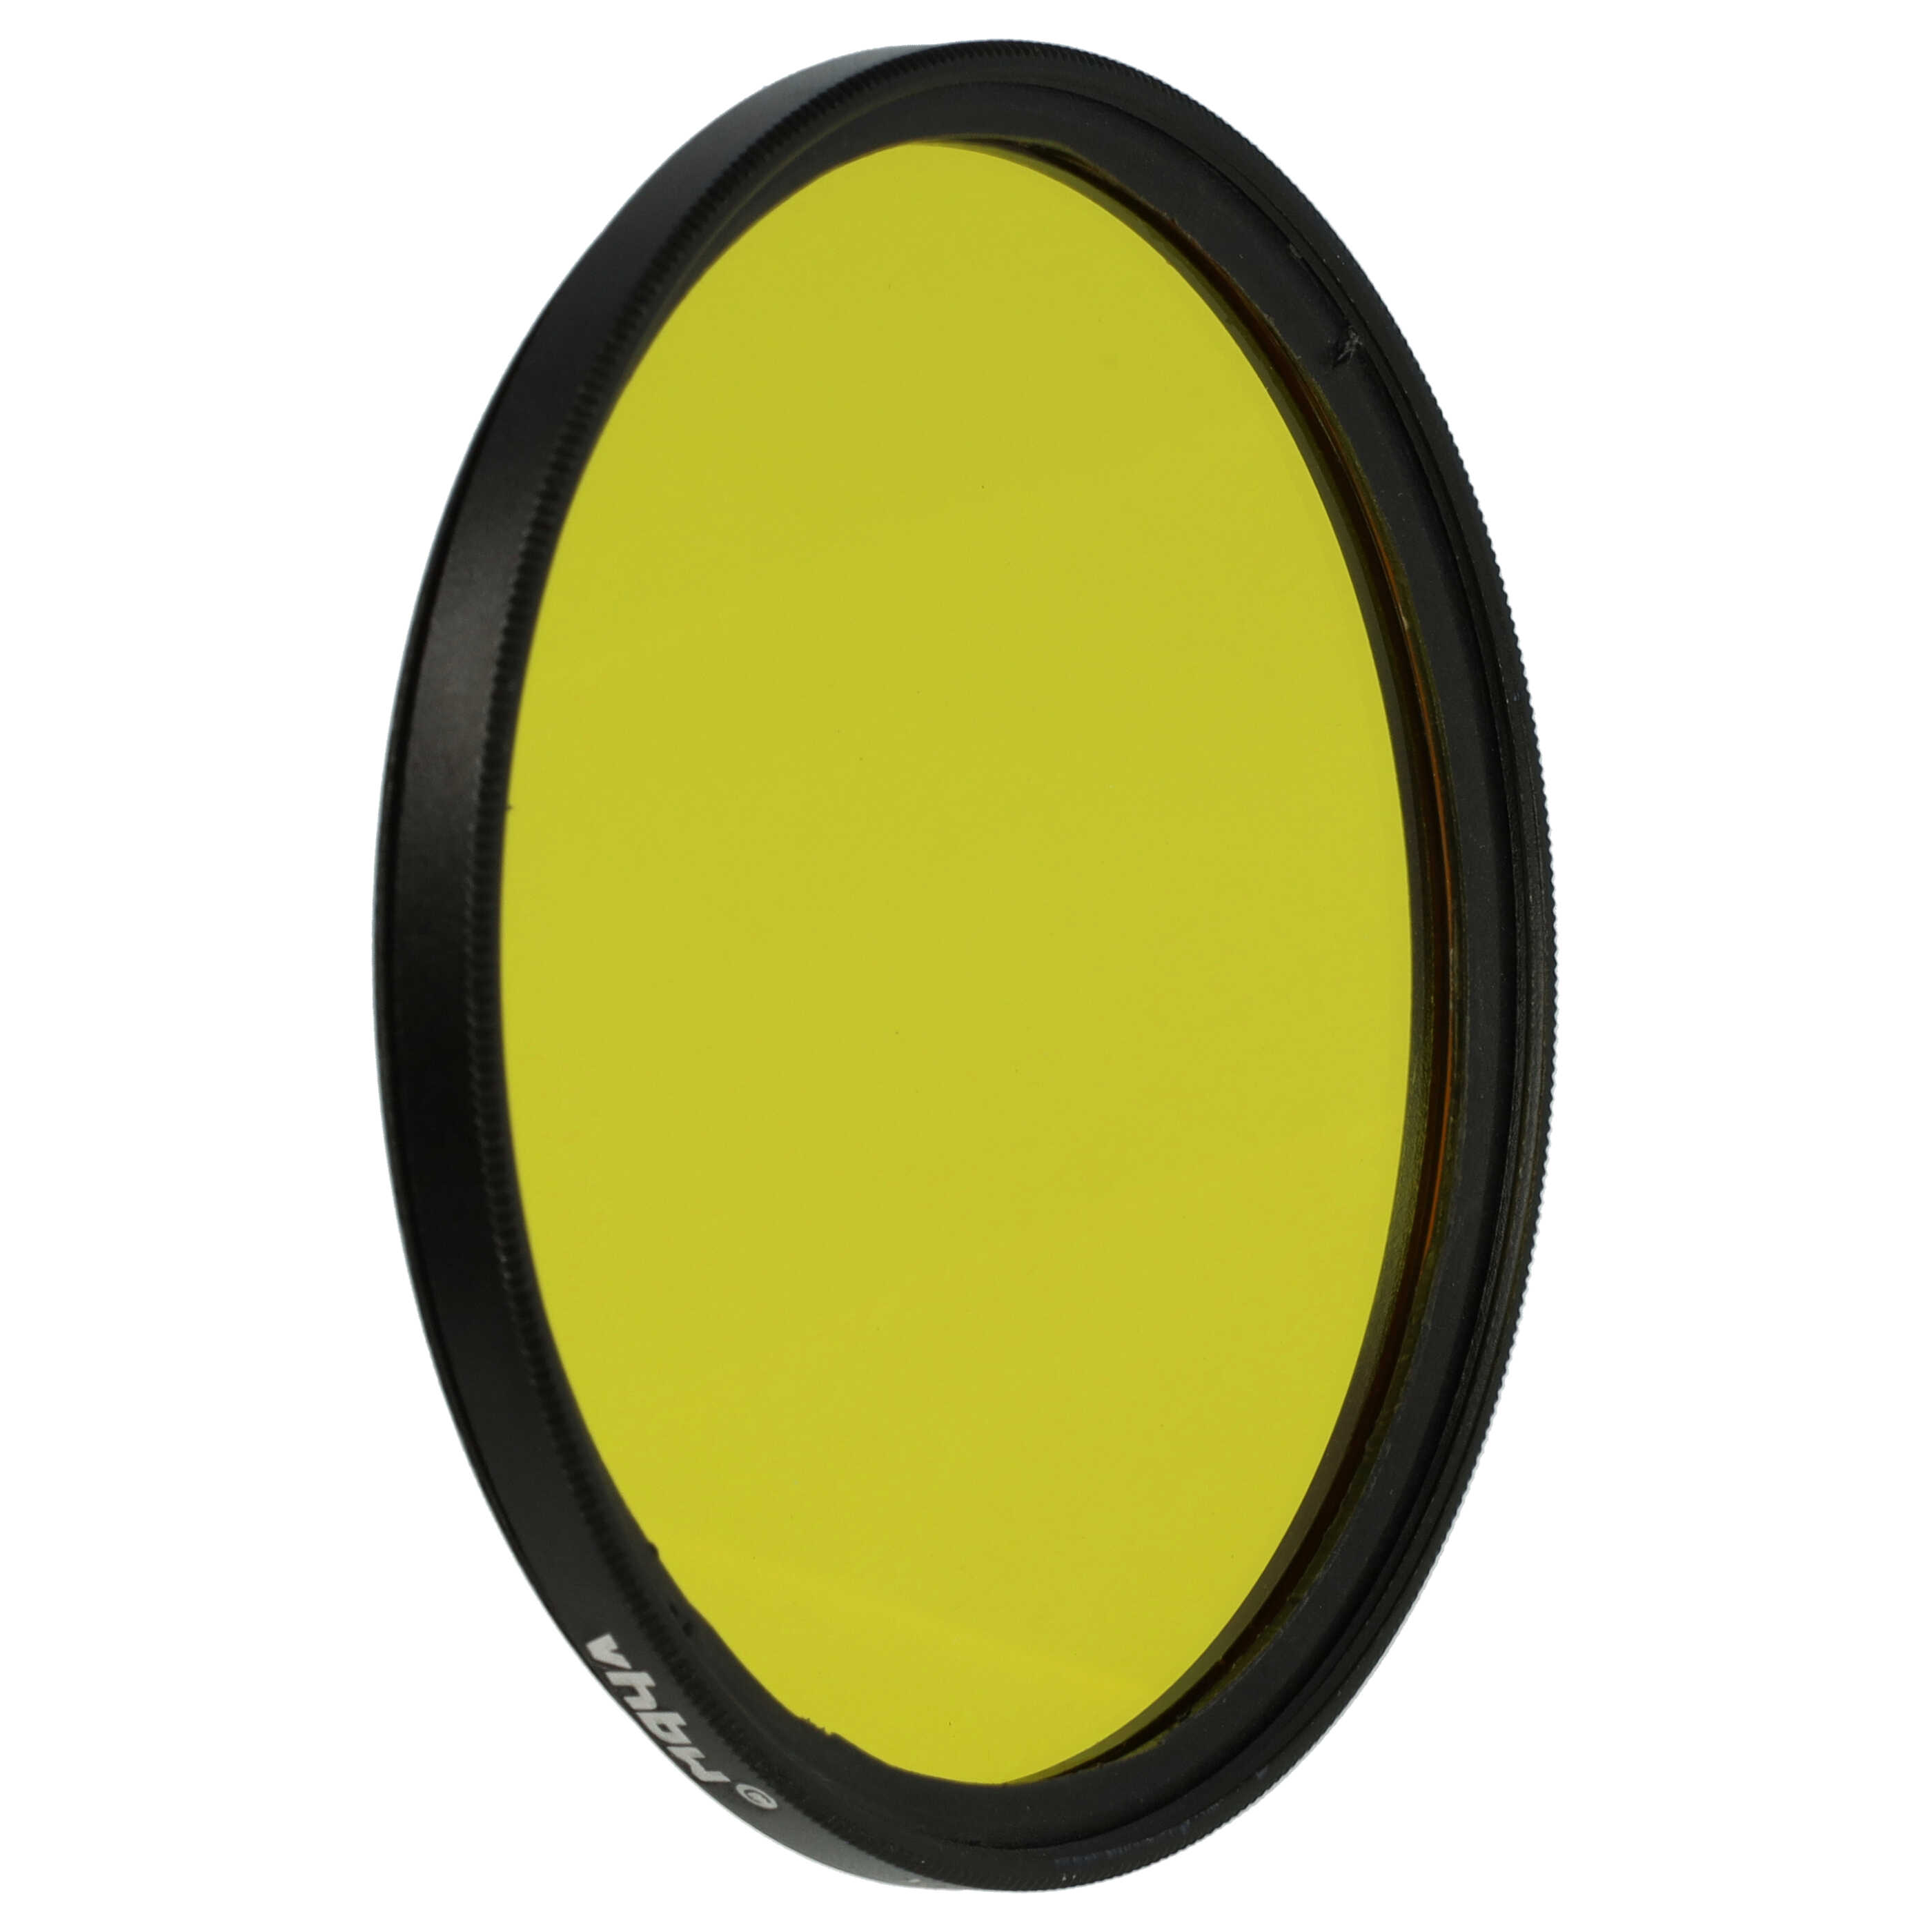 Coloured Filter, Yellow suitable for Camera Lenses with 67 mm Filter Thread - Yellow Filter